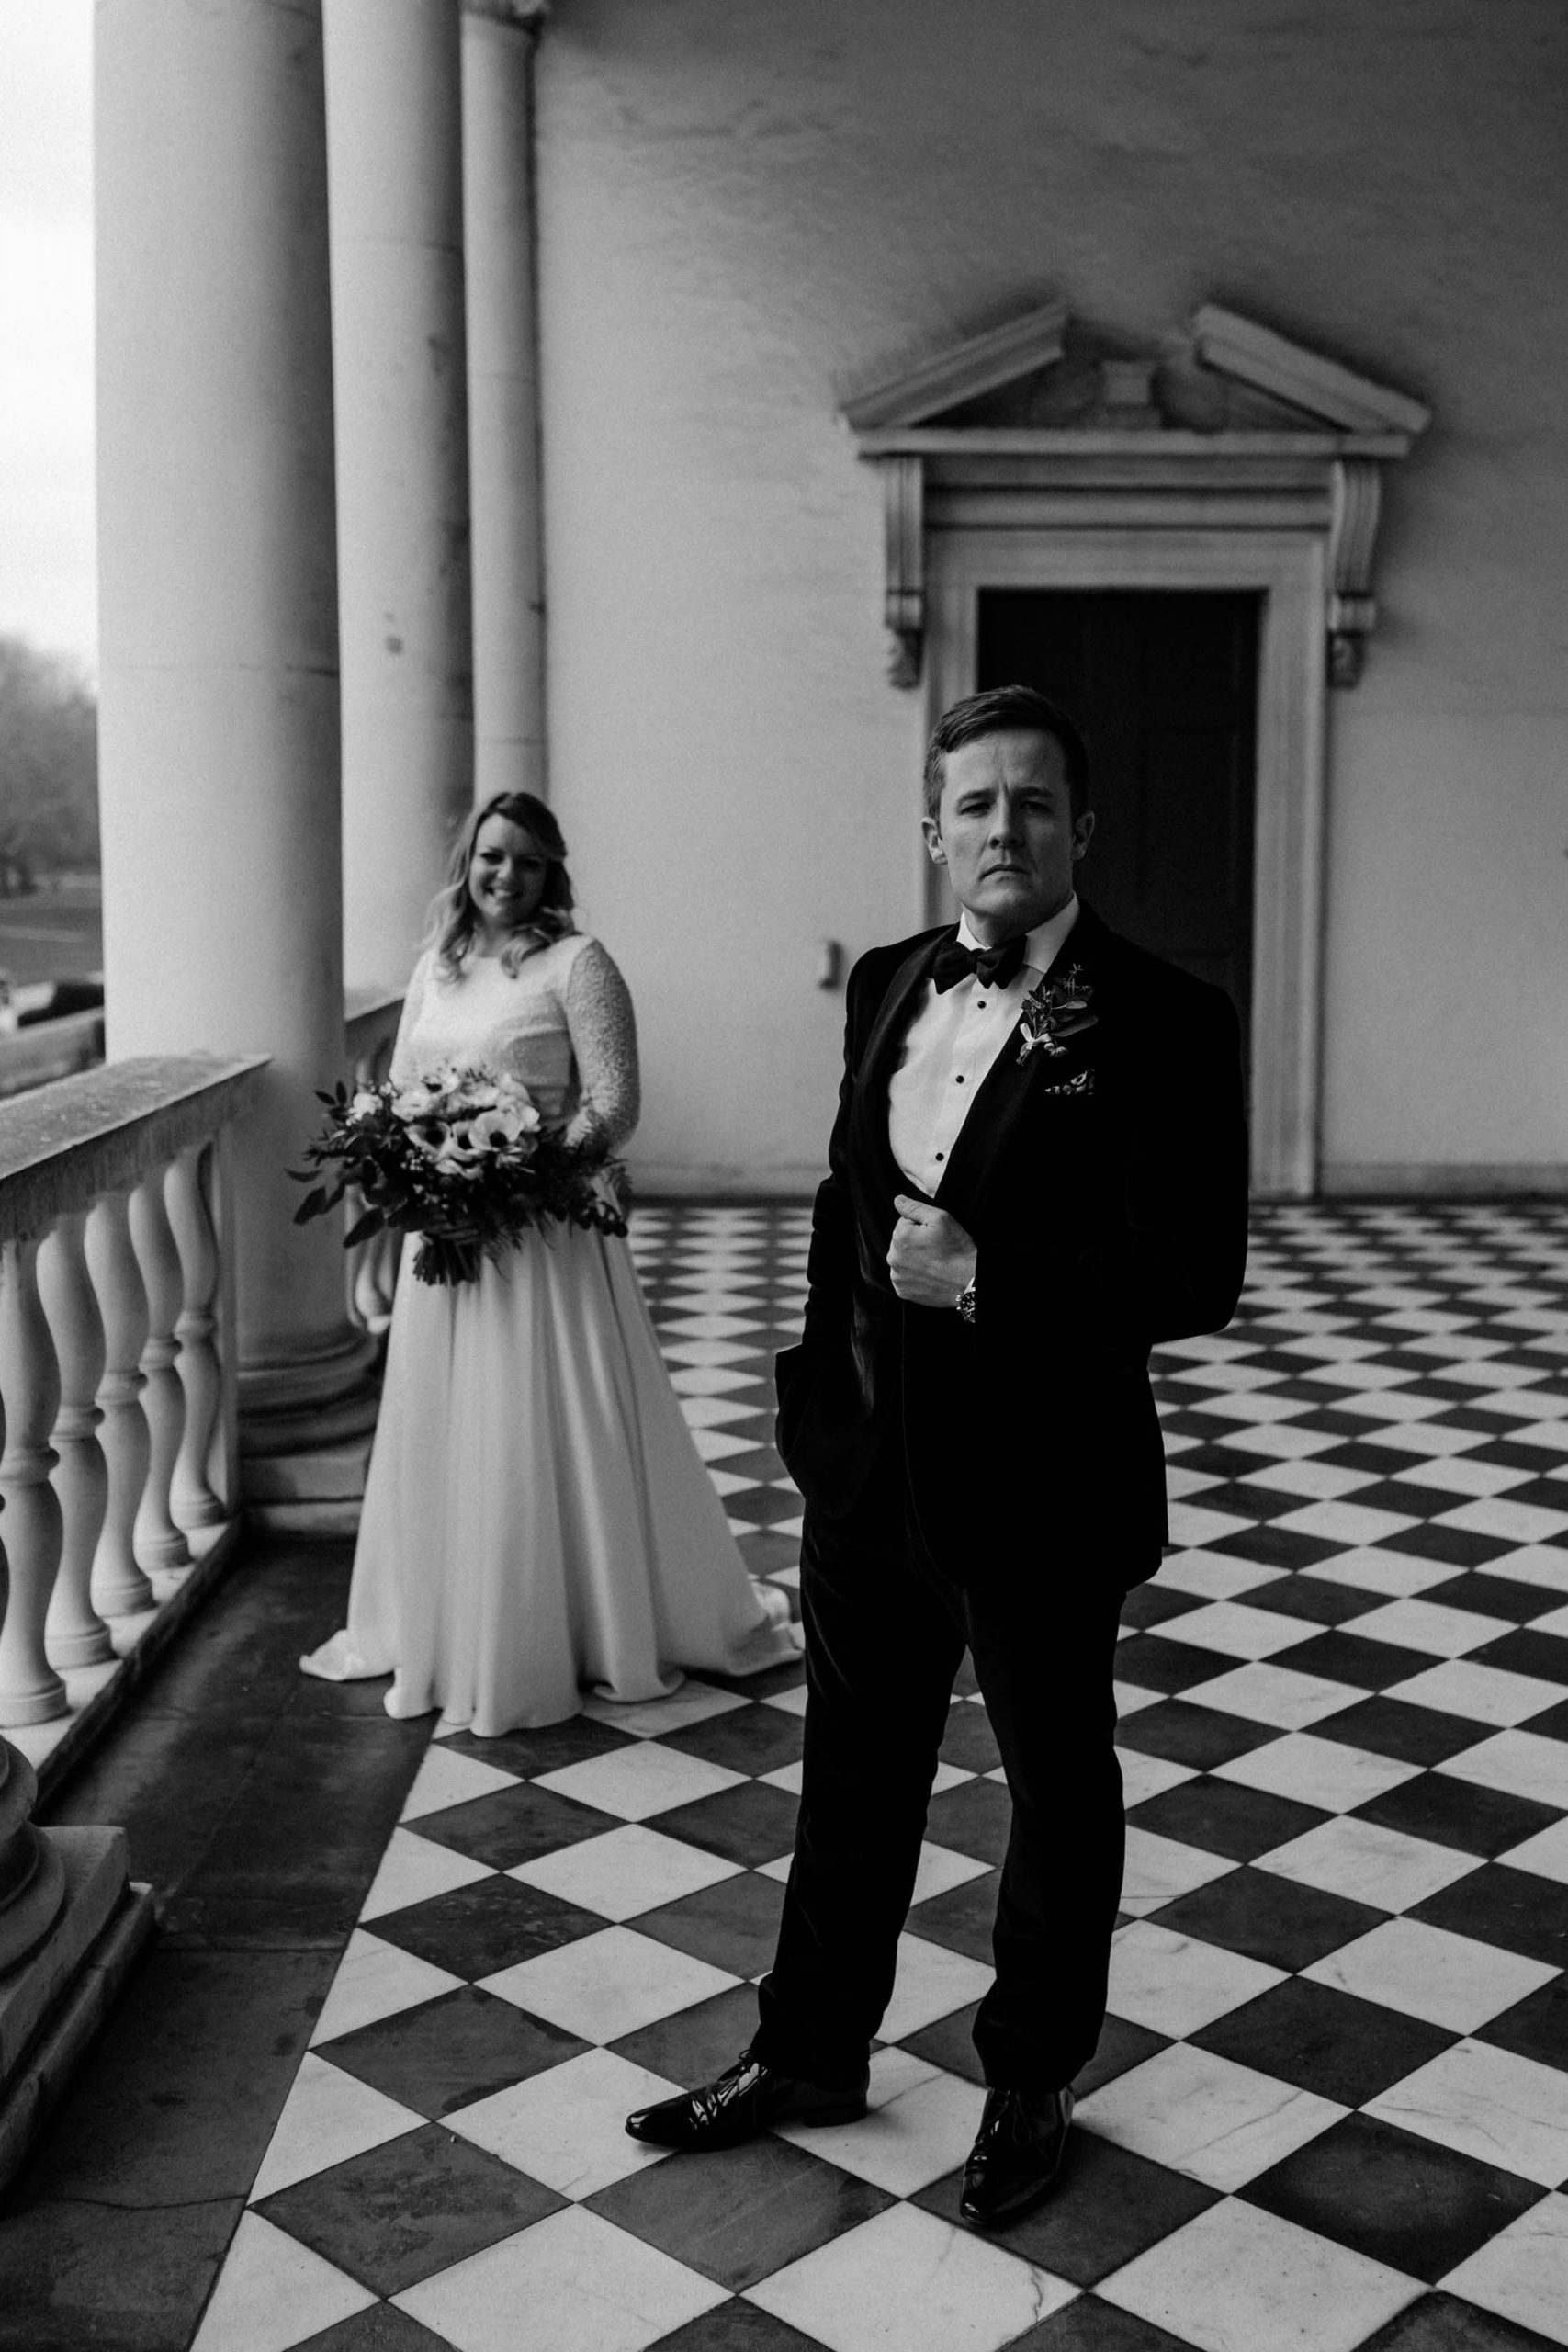 cool black and white photo of wedding couple in queens house balcony